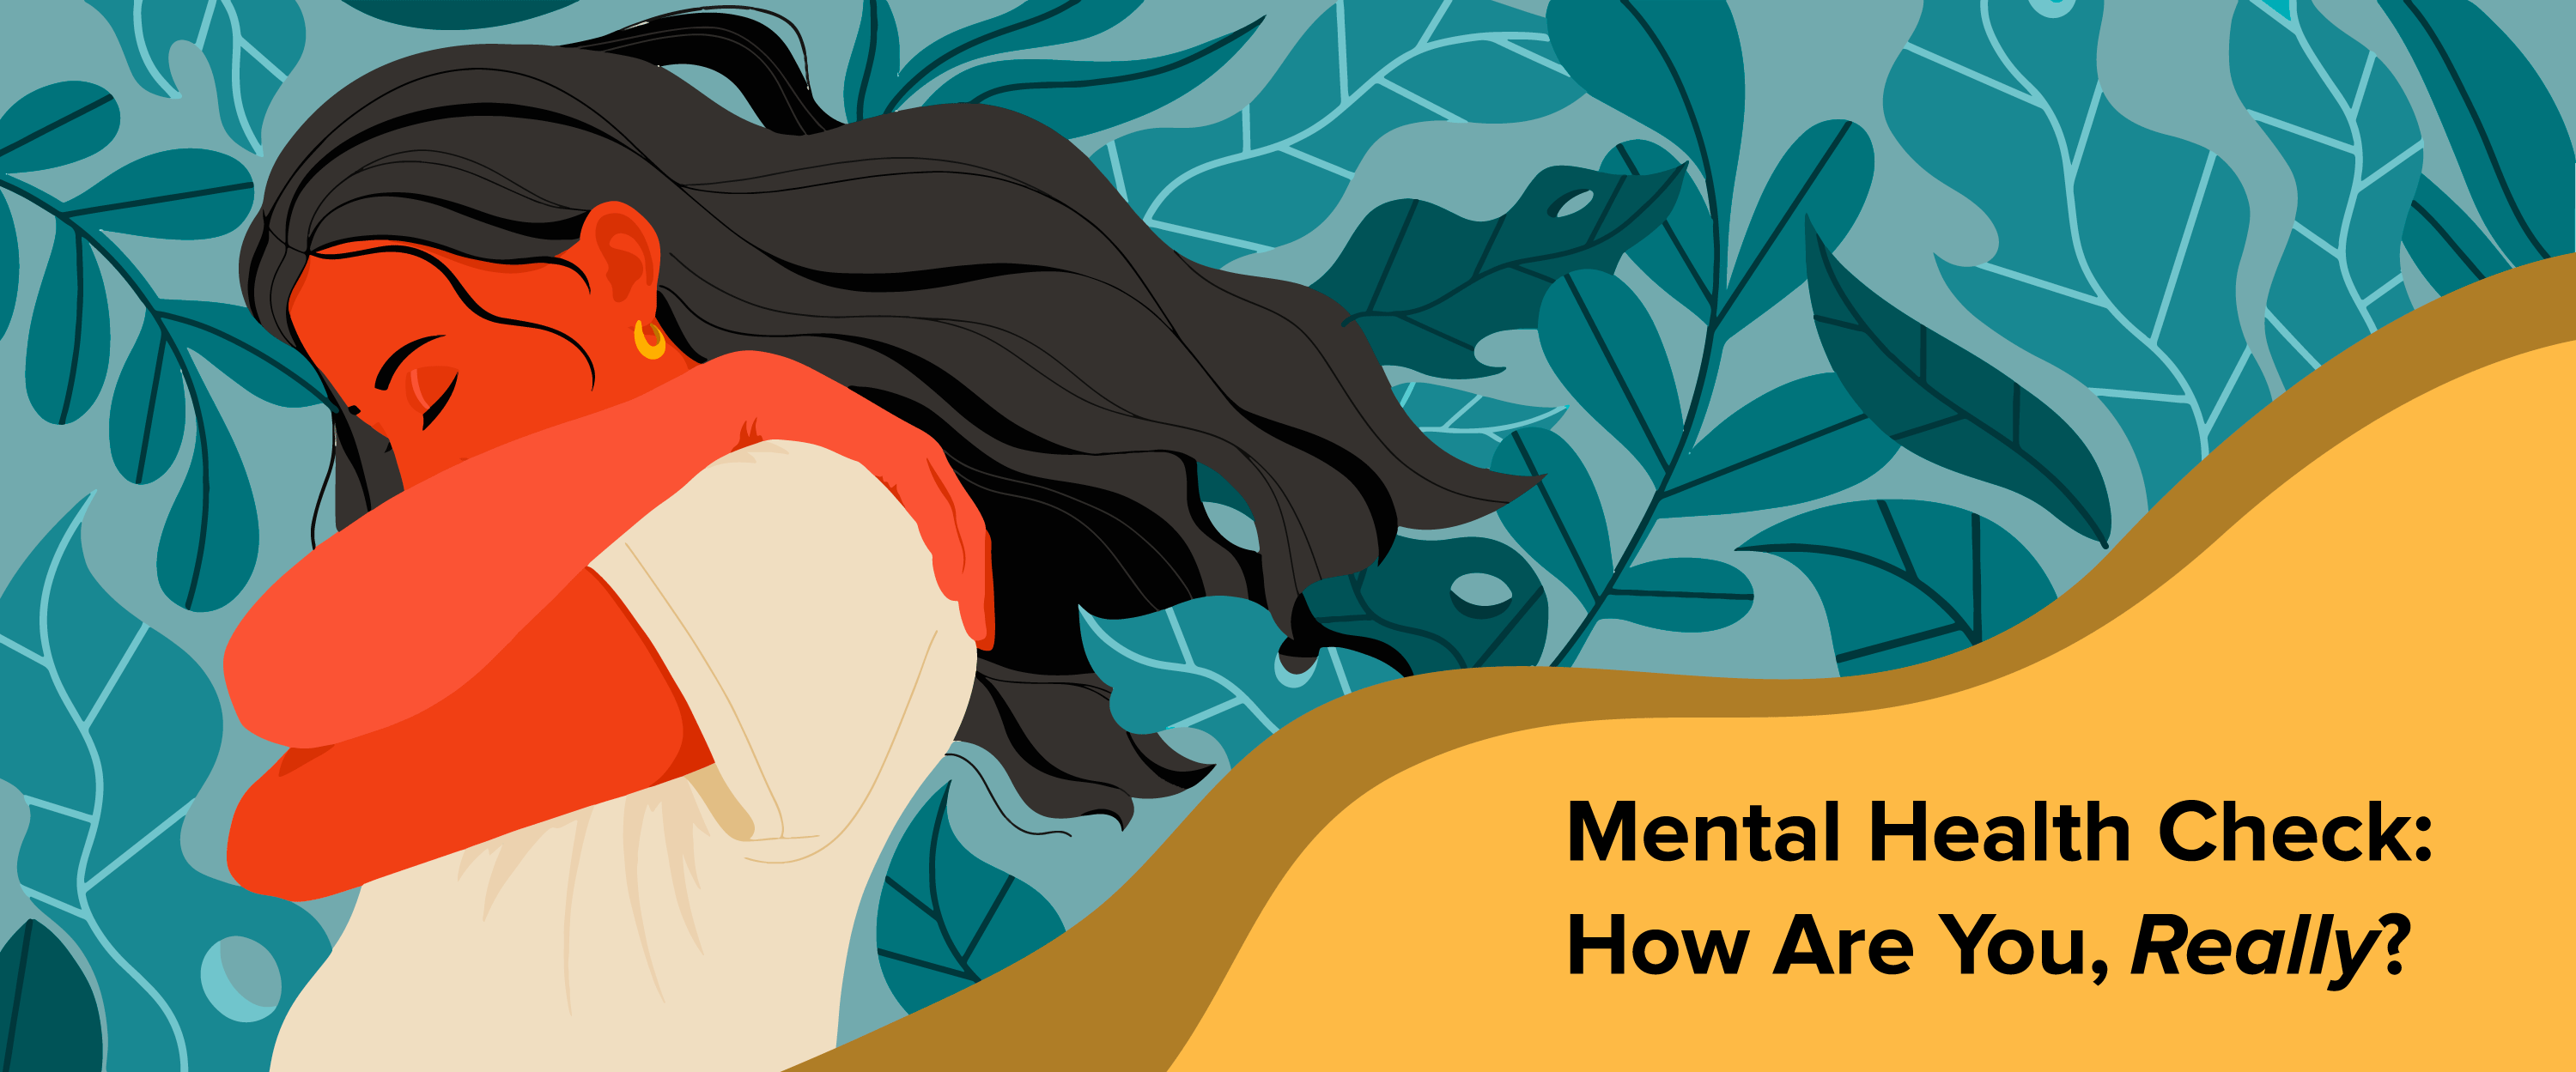 Mental Health Check: How Are You, Really?